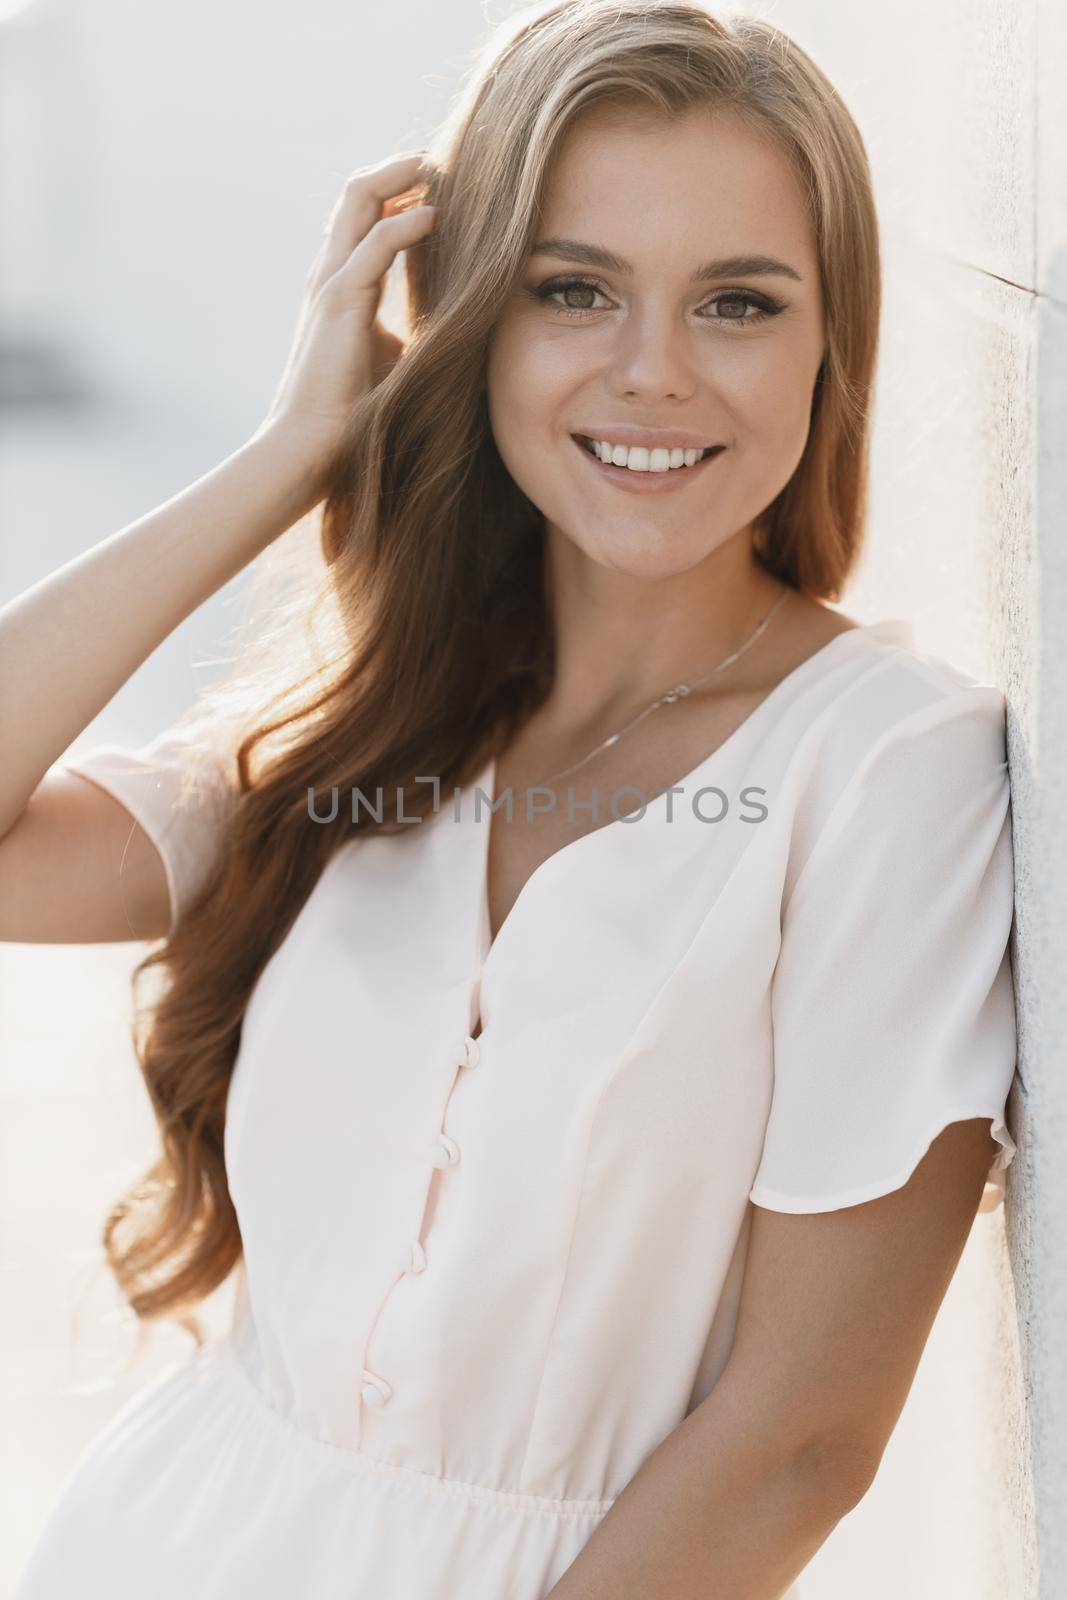 Young happy smiling woman in hat outdoor by splash